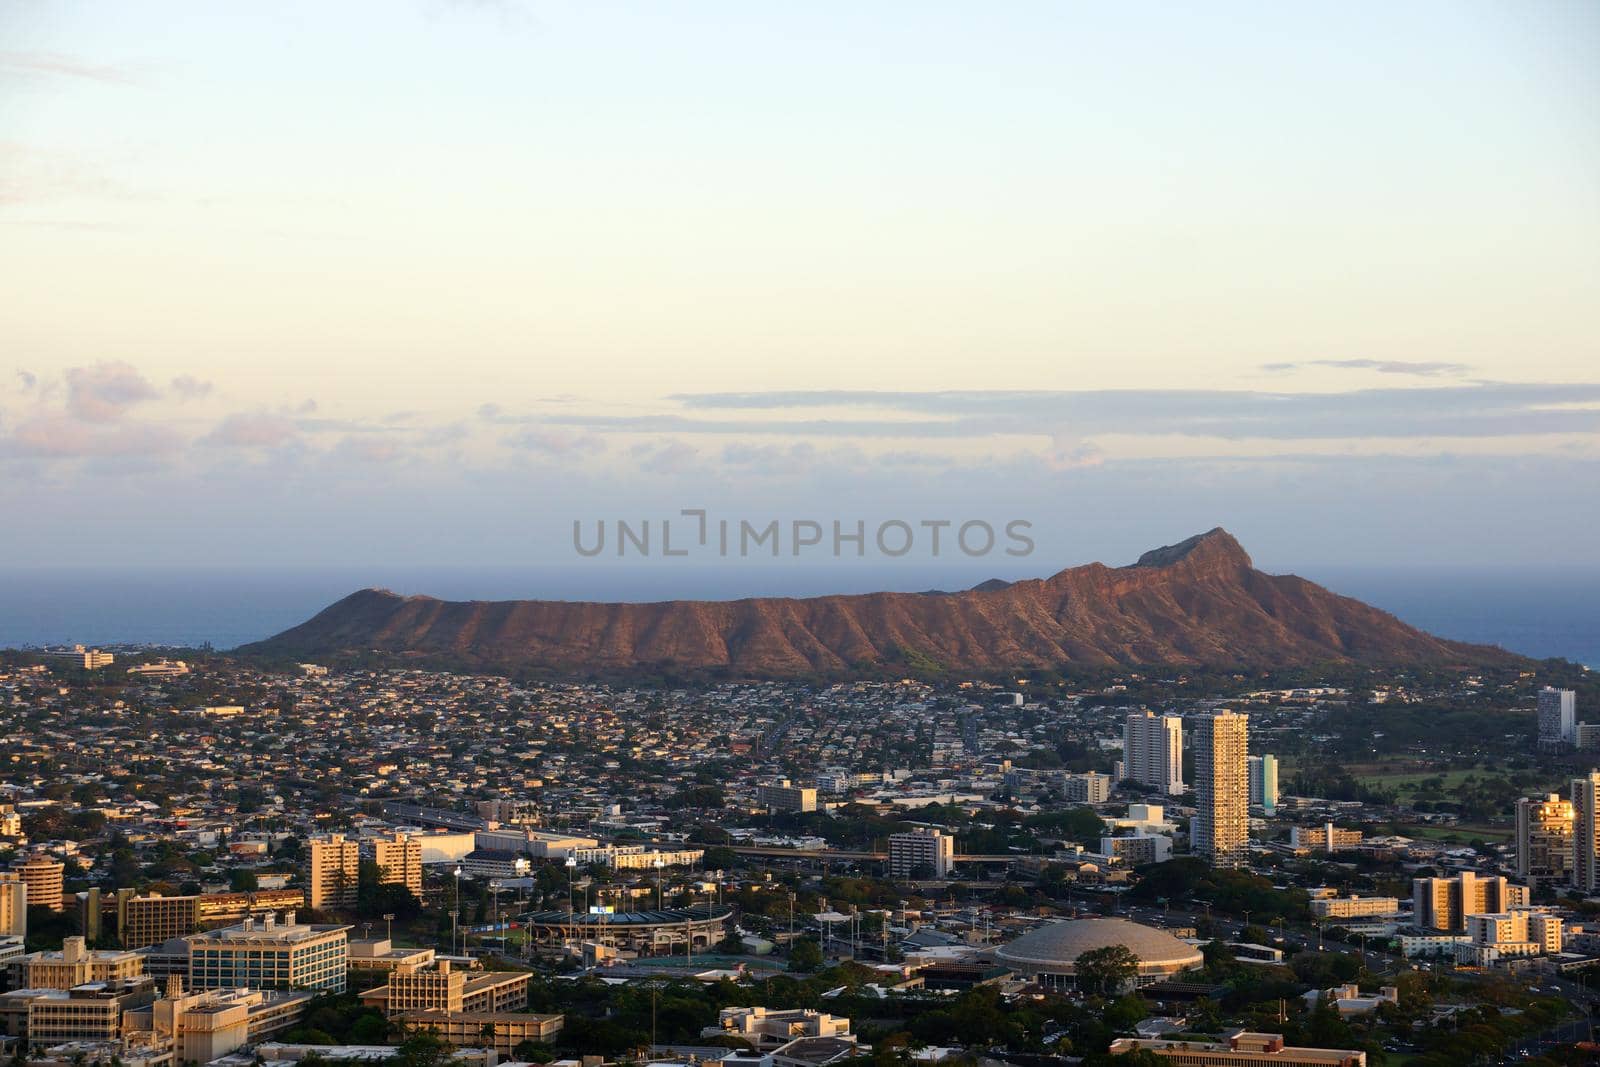 The city of Honolulu from Diamond head to Manoa with Kaimuki, Kahala, and oceanscape visible on Oahu on a nice day at dusk viewed from high in the mountains with tall trees in the foreground.  Seen from Round Top Drive Lookout.  May 17, 2015.